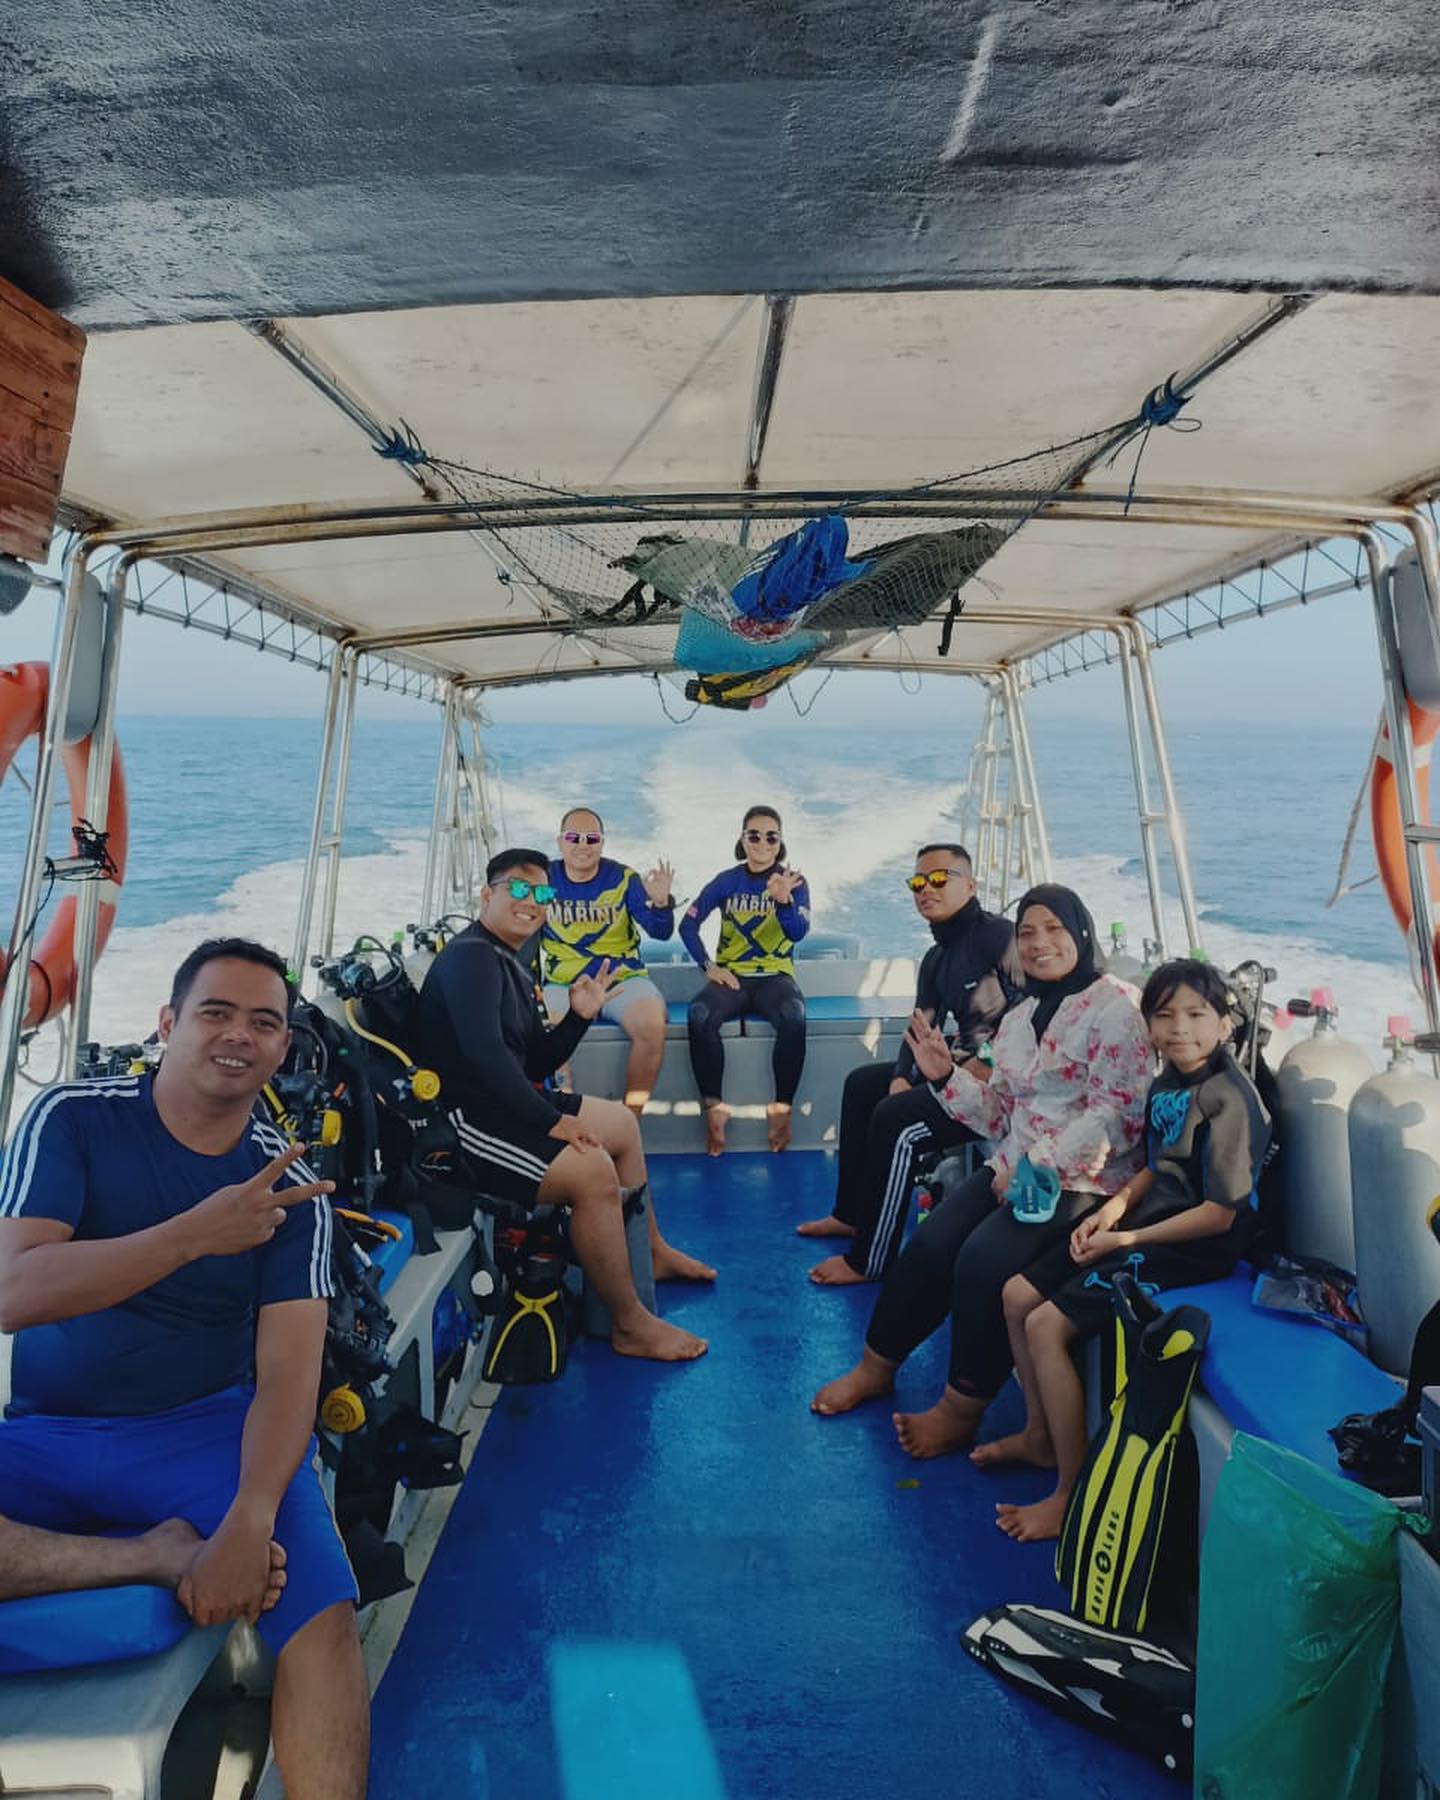 2 days dive with Monique and APM group for dive trainingThank you for diving wit…